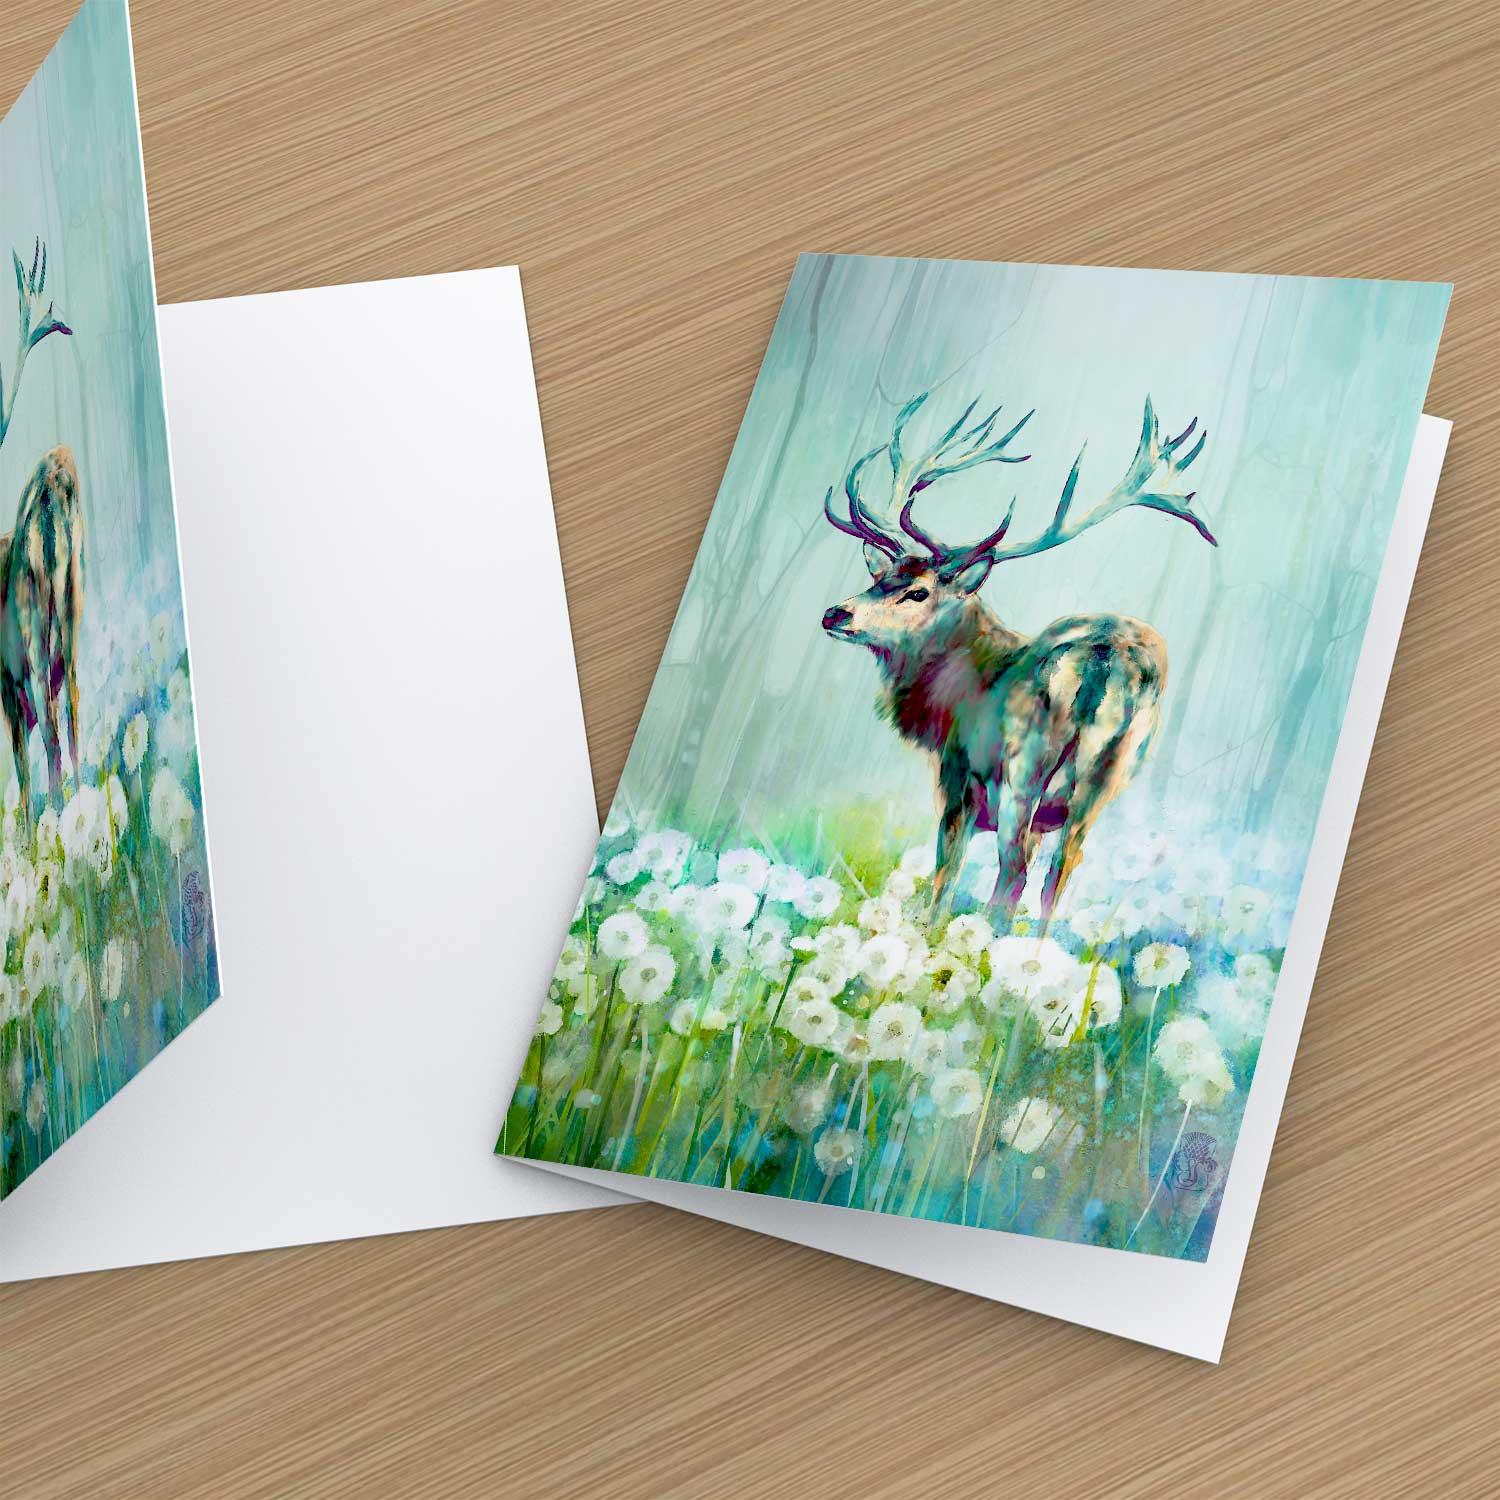 Stag Greeting Card from an original painting by artist Lee Scammacca